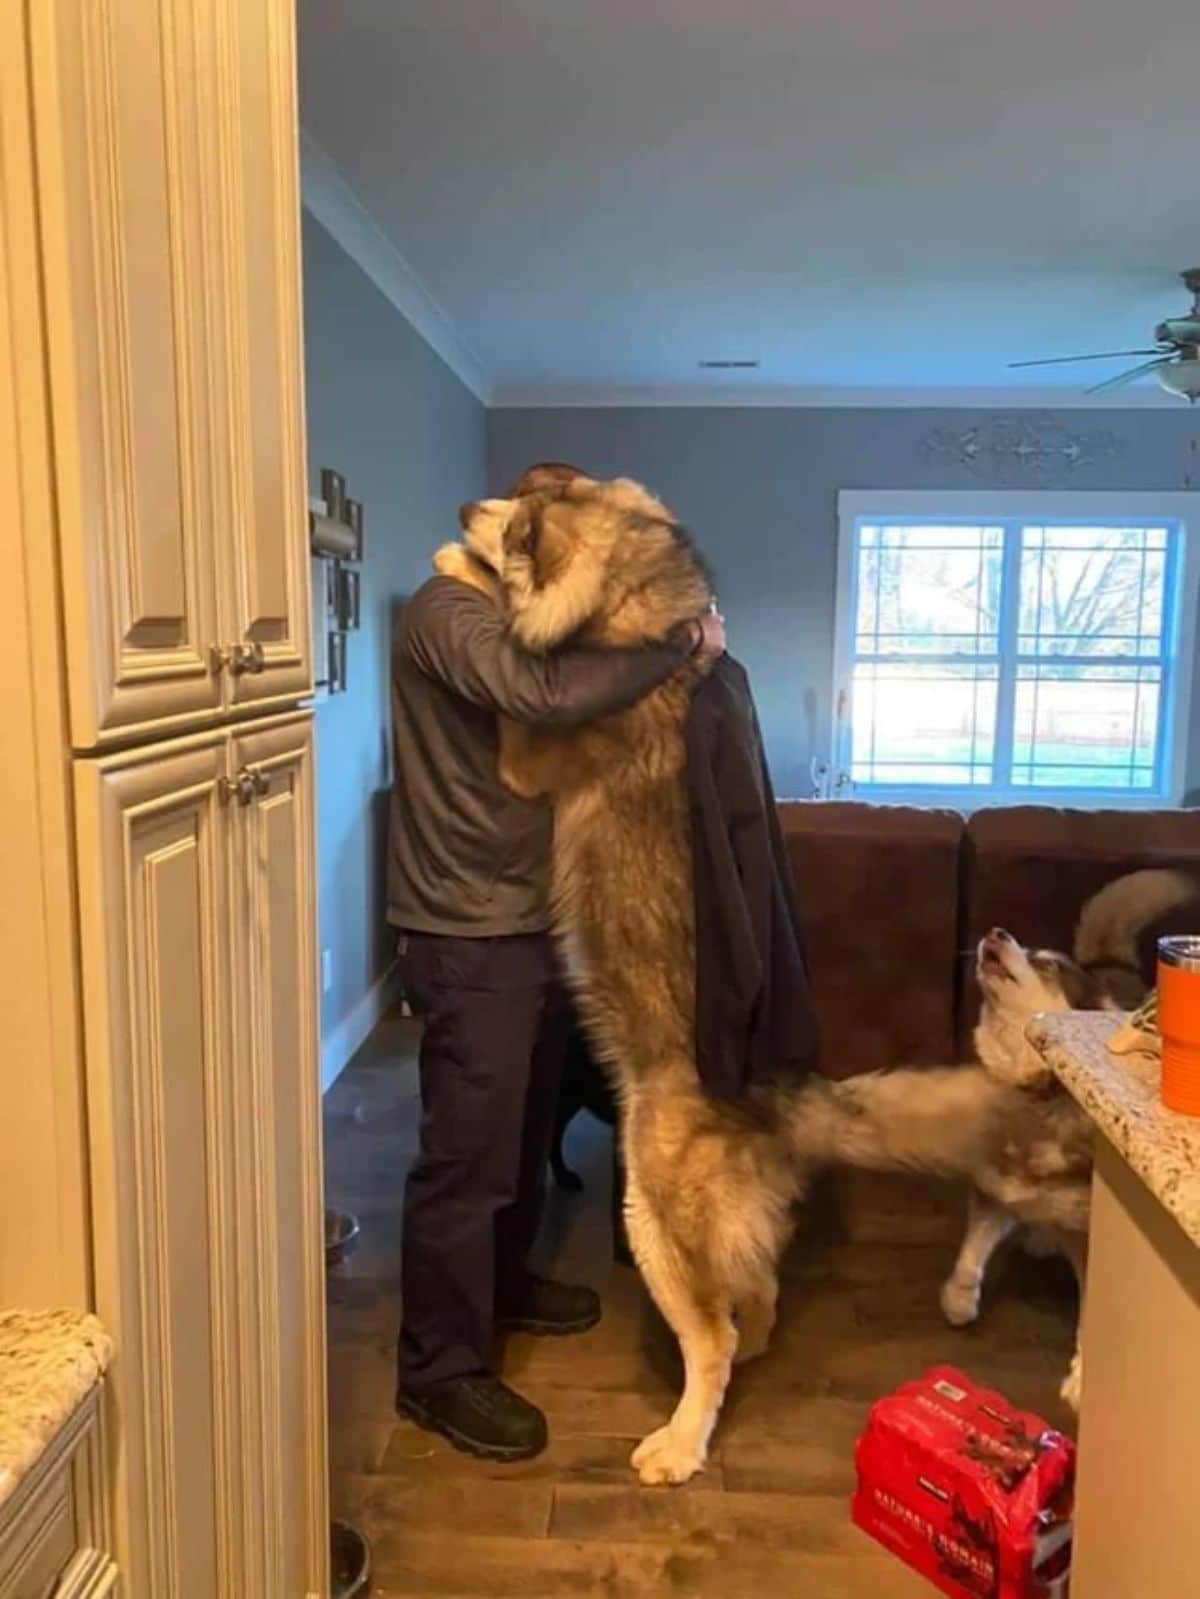 large brown alaskan malamute standing on hind legs and being hugged by someone